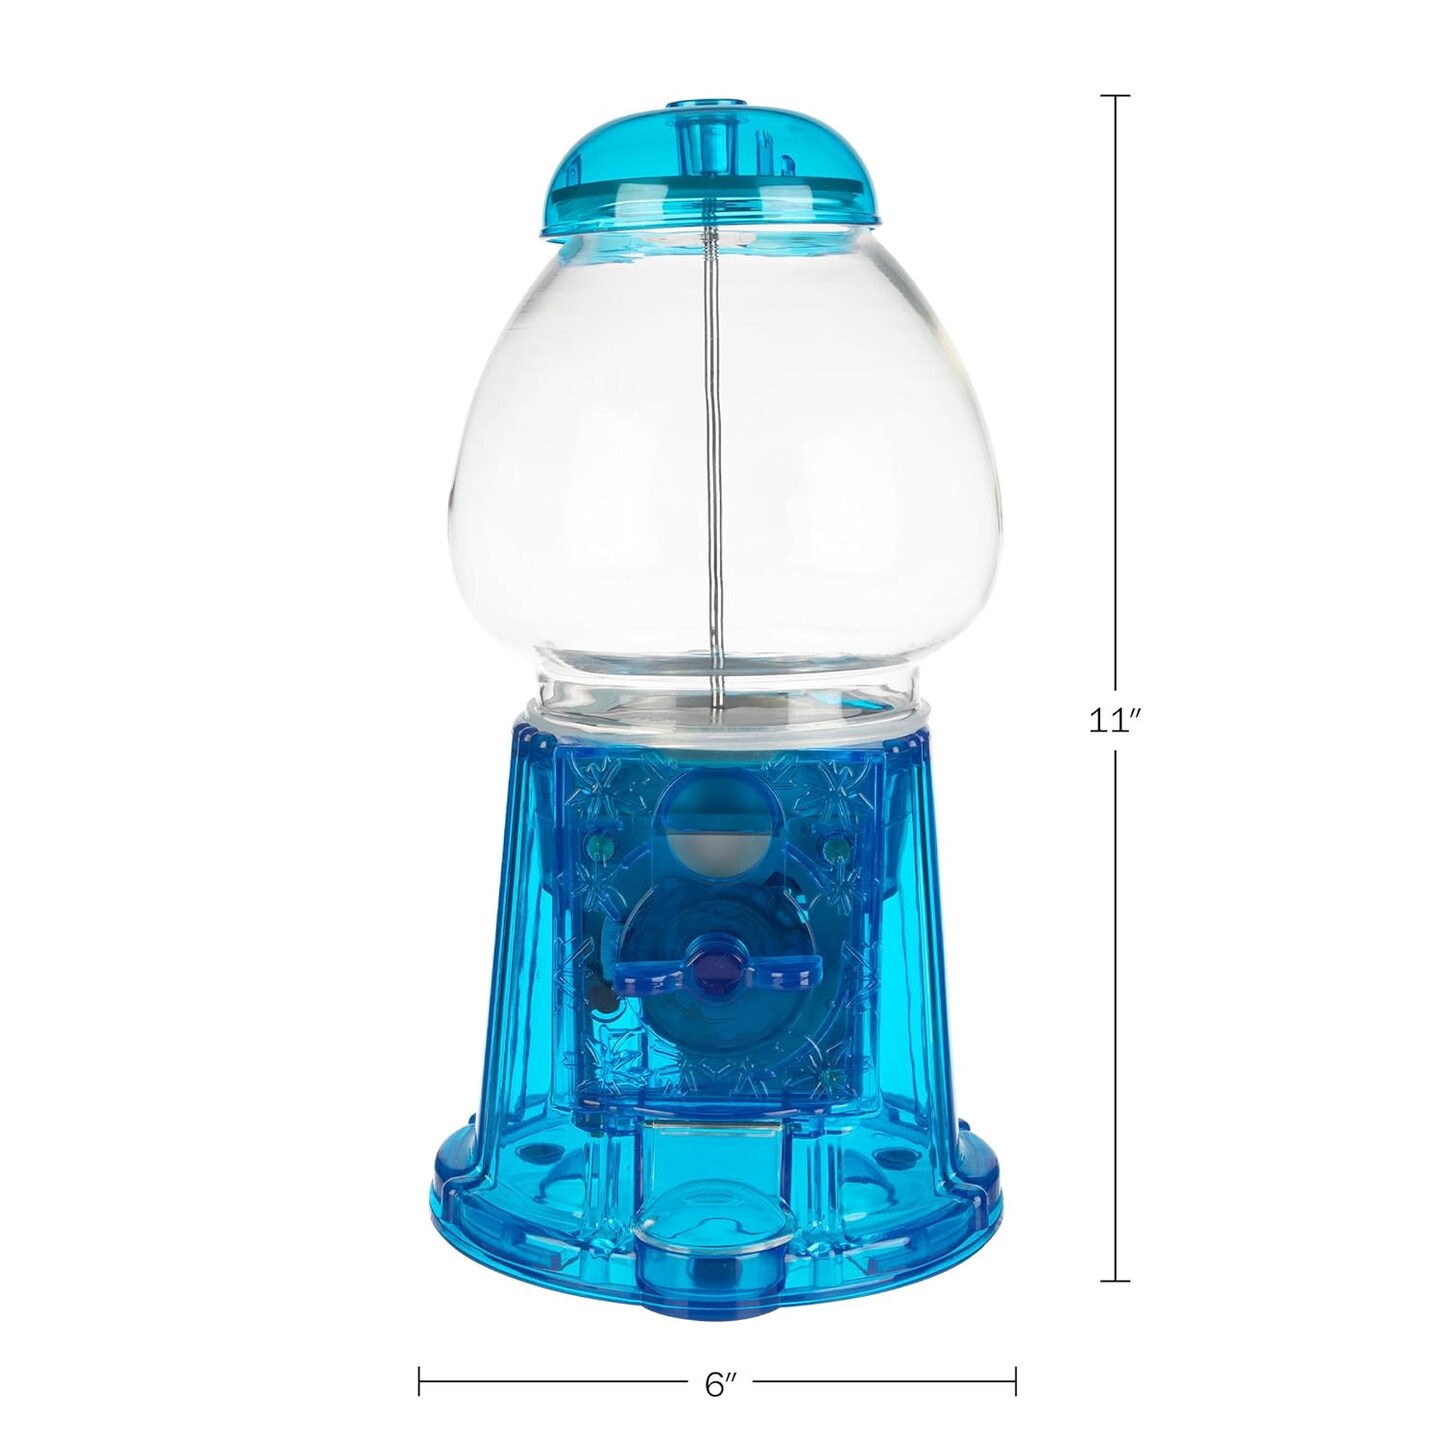 Blue Gumball Machine for Kids Girls Gumball Bank Candy Dispenser for Home, Bar, Carnival Party Candyland Party Favors